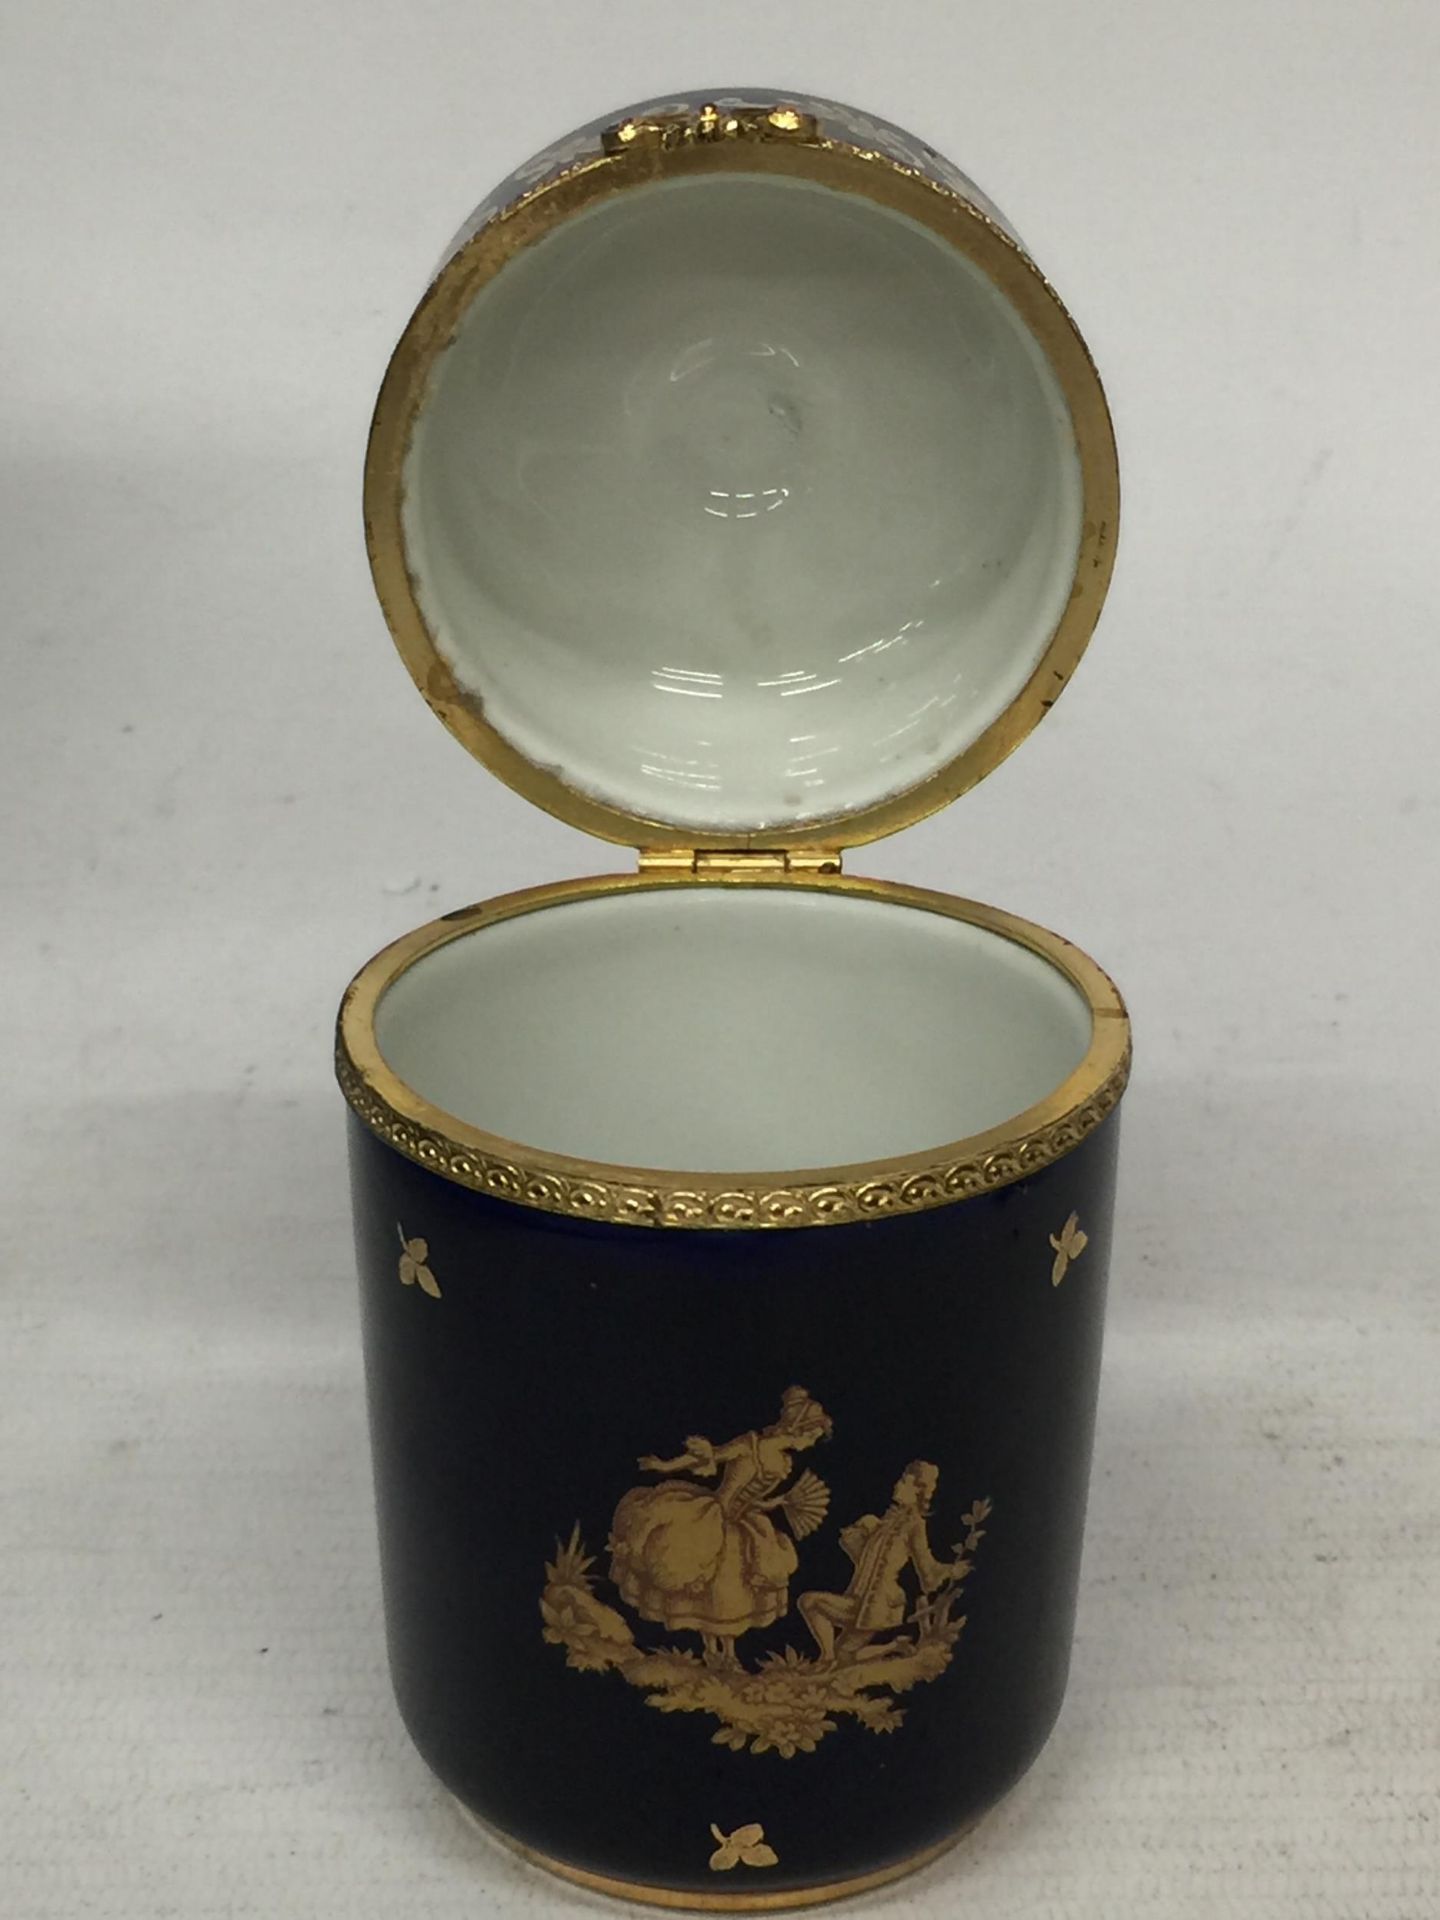 A LIMOGES CASTEL FRANCE 22K GOLD COBALT BLUE WITH GOLD SCROLL ACCENTS LOVERS PORCELAIN BOX WITH - Image 3 of 4